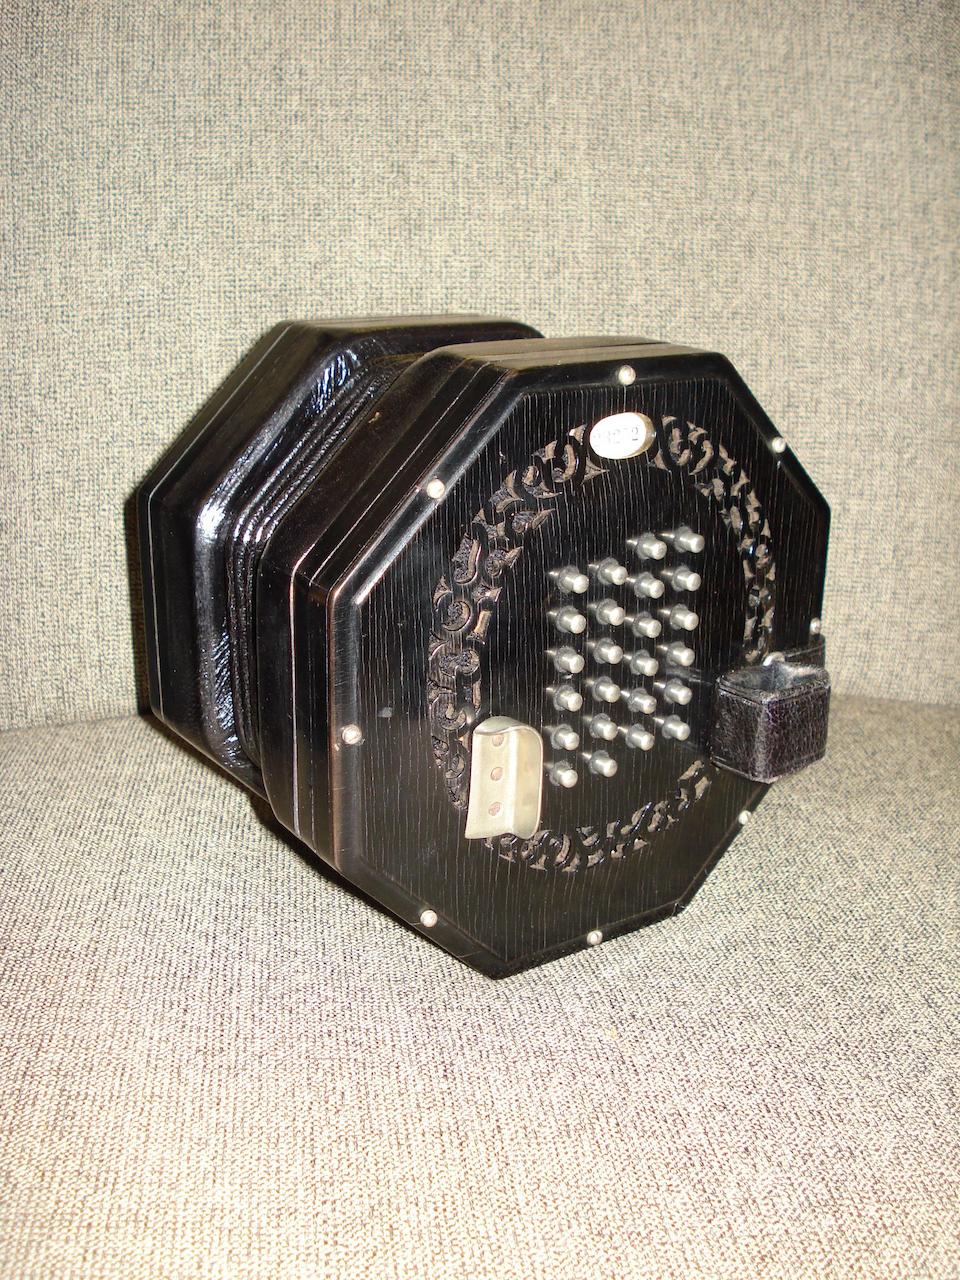 An English System Concertina Labelled Wheatstone & Co (2)